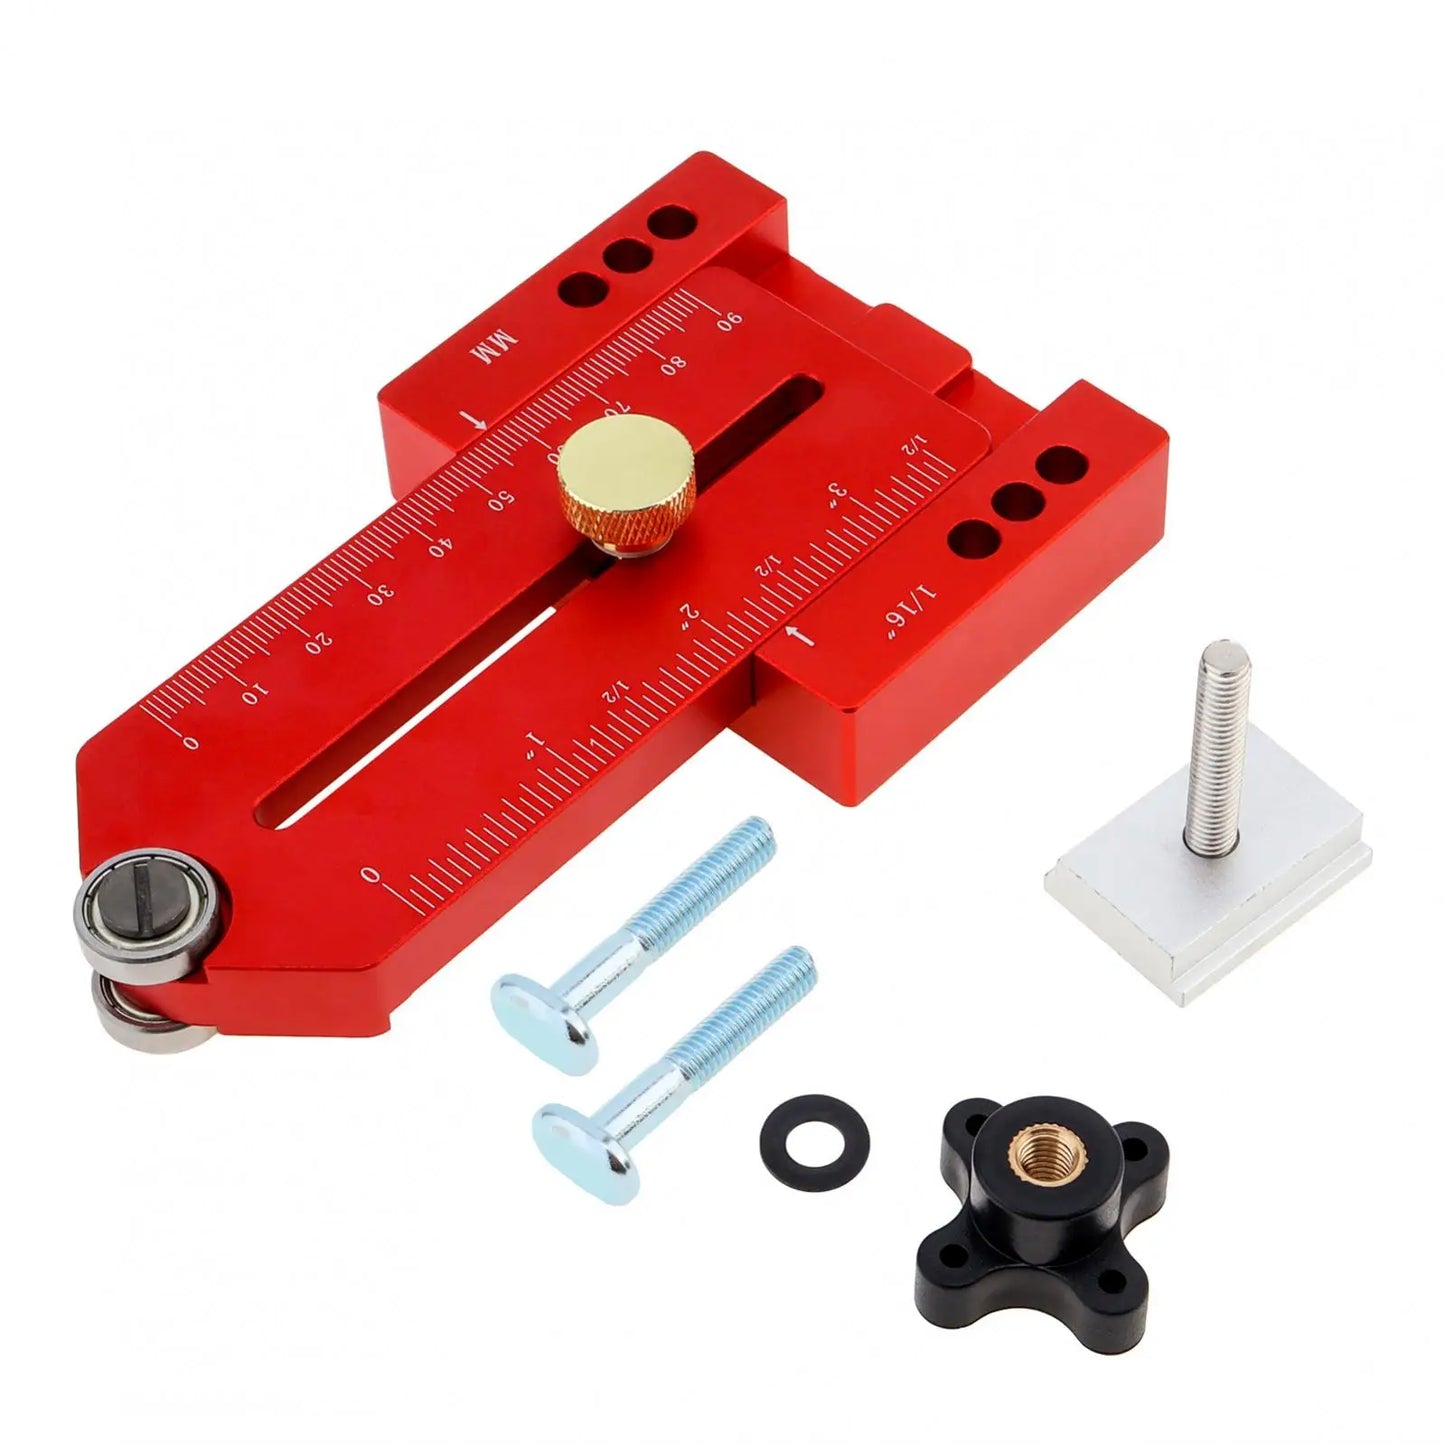 Extended Thin Rip Jig Guide Making Repetitive Narrow Strip Cuts Jig Guide